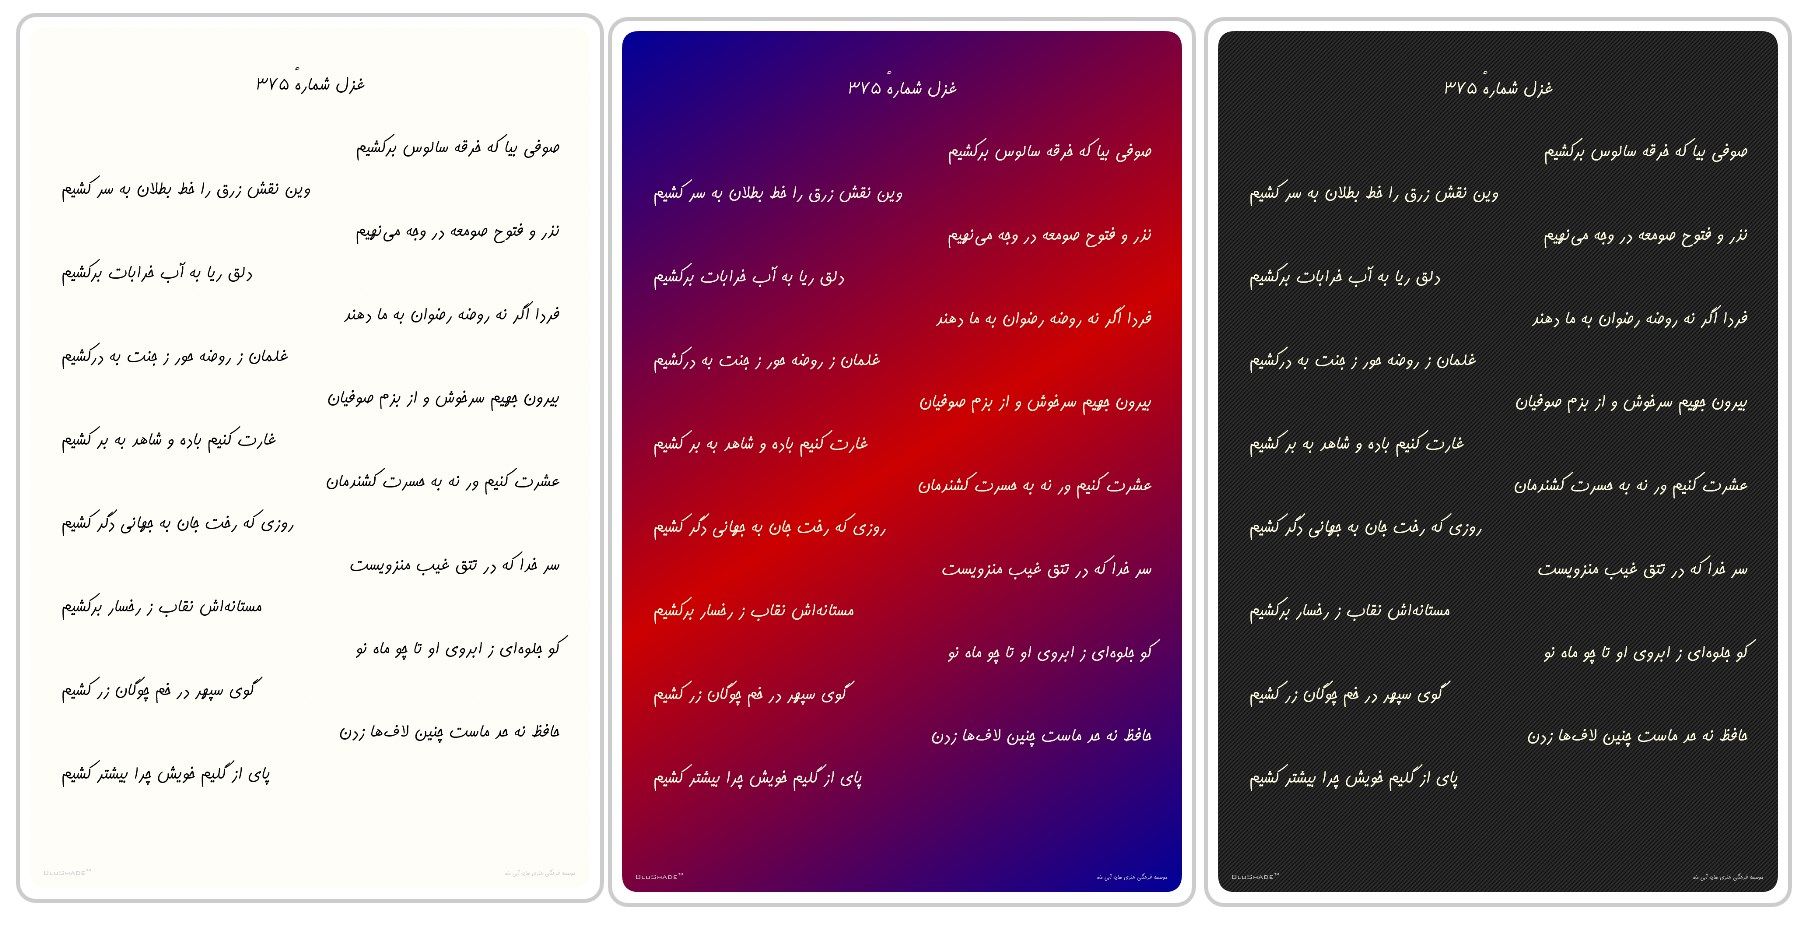 Rendered Images Of Same Poem With 3 Backgrounds